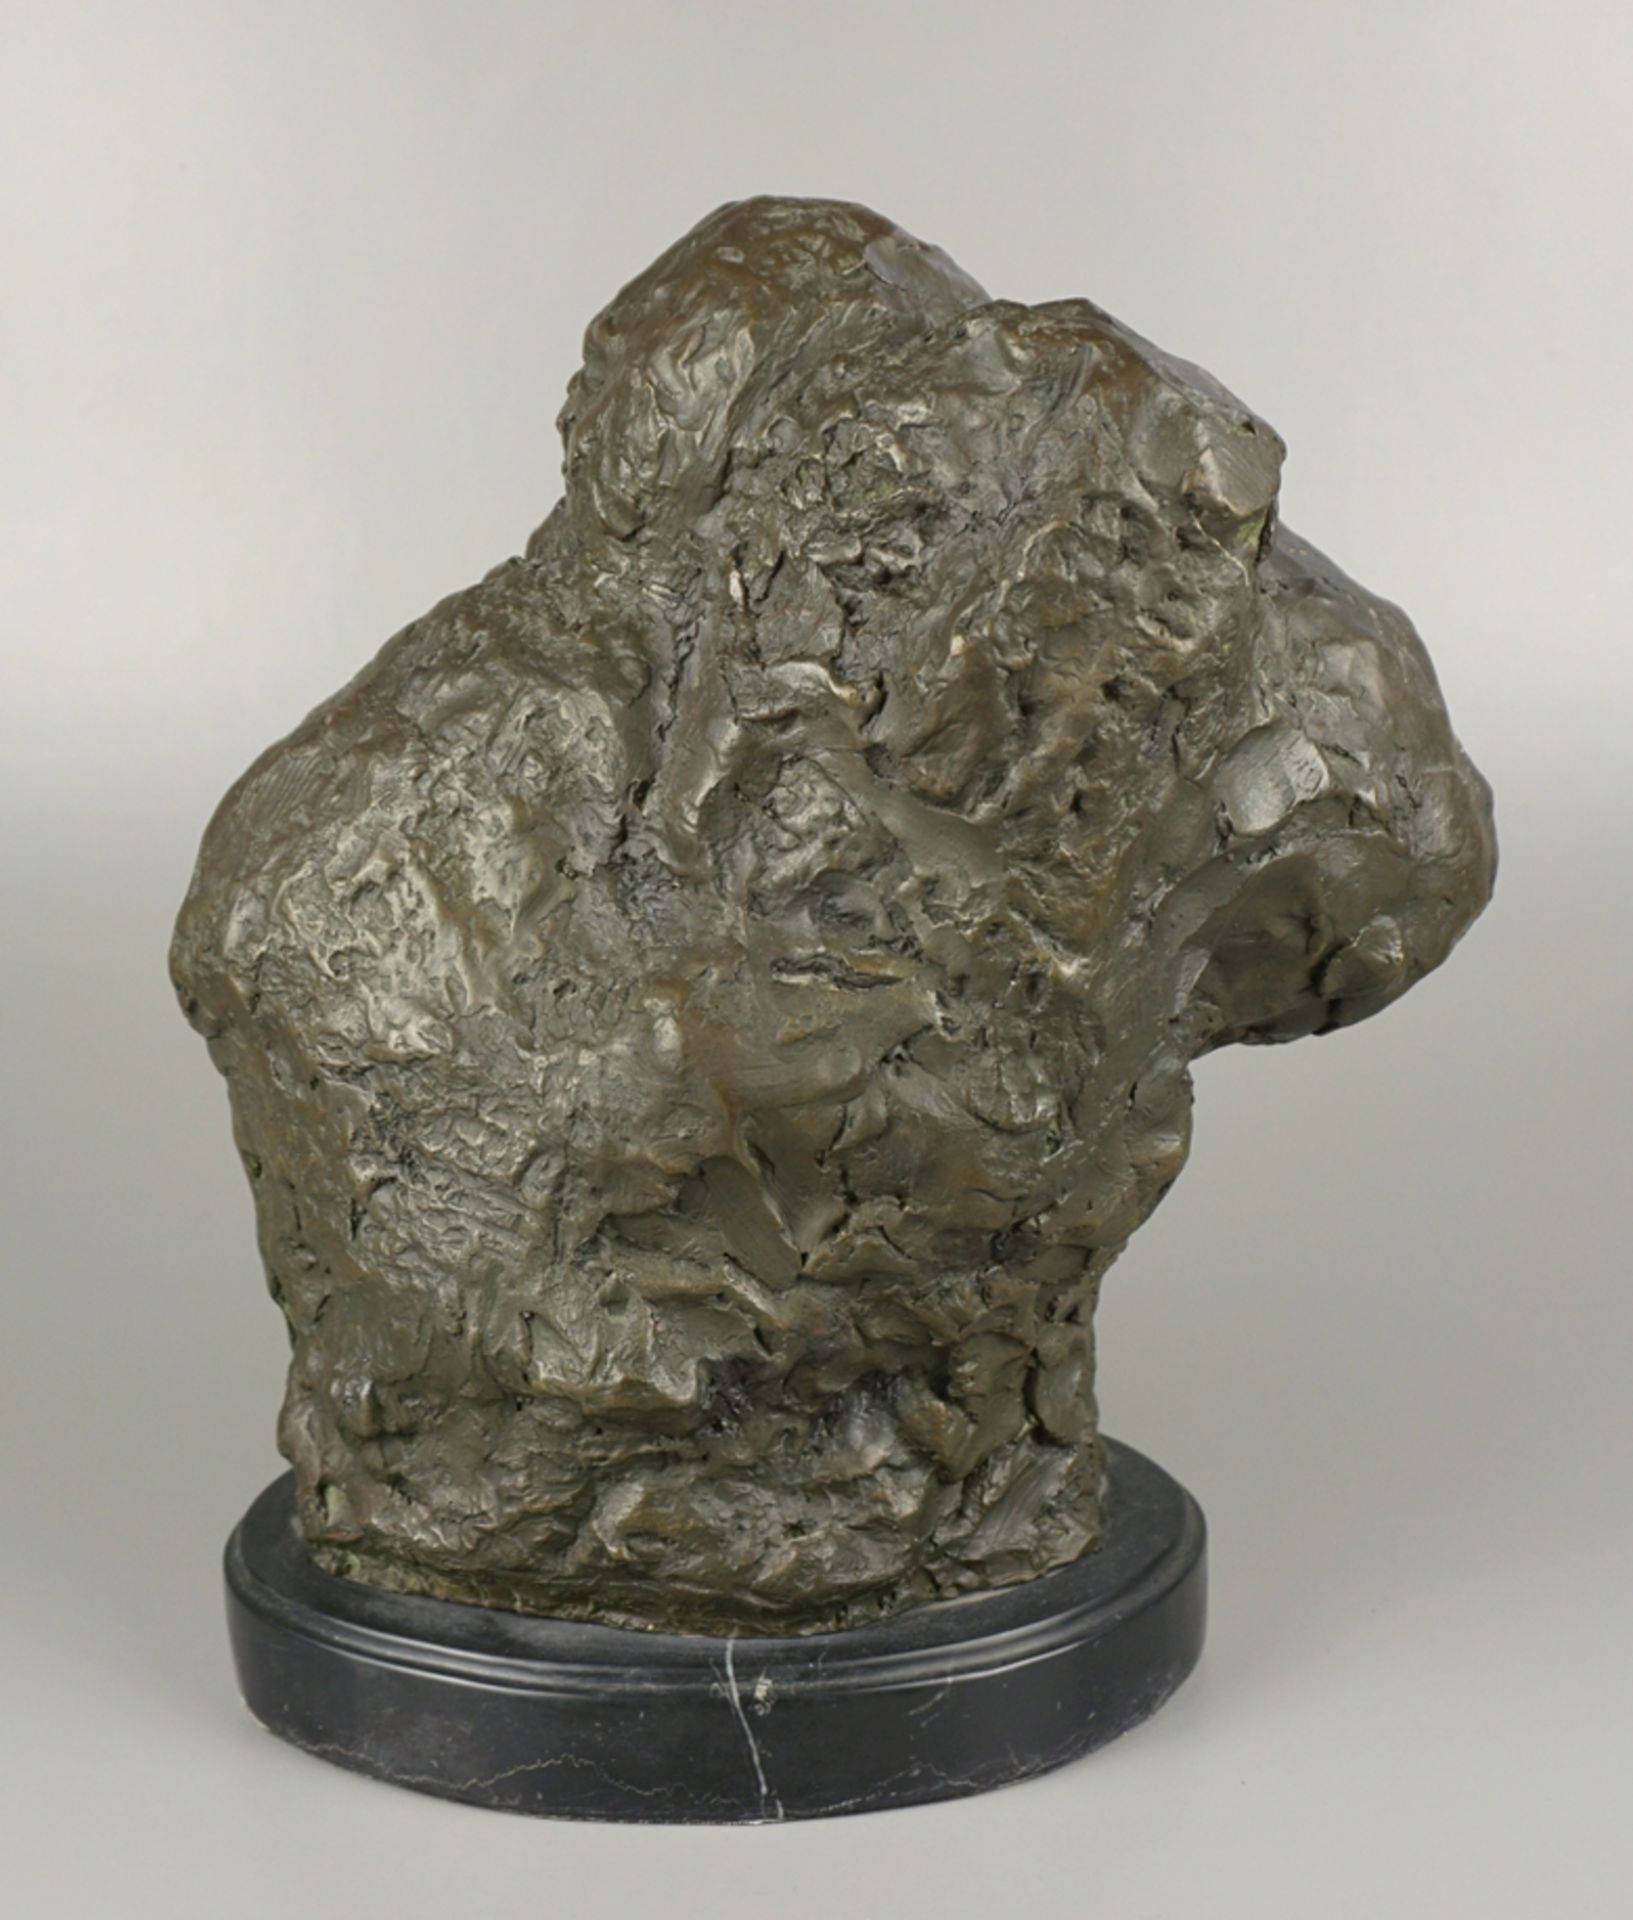 Bronze sculpture "Mother's Happiness", 2nd half 20th cent. - Image 2 of 2